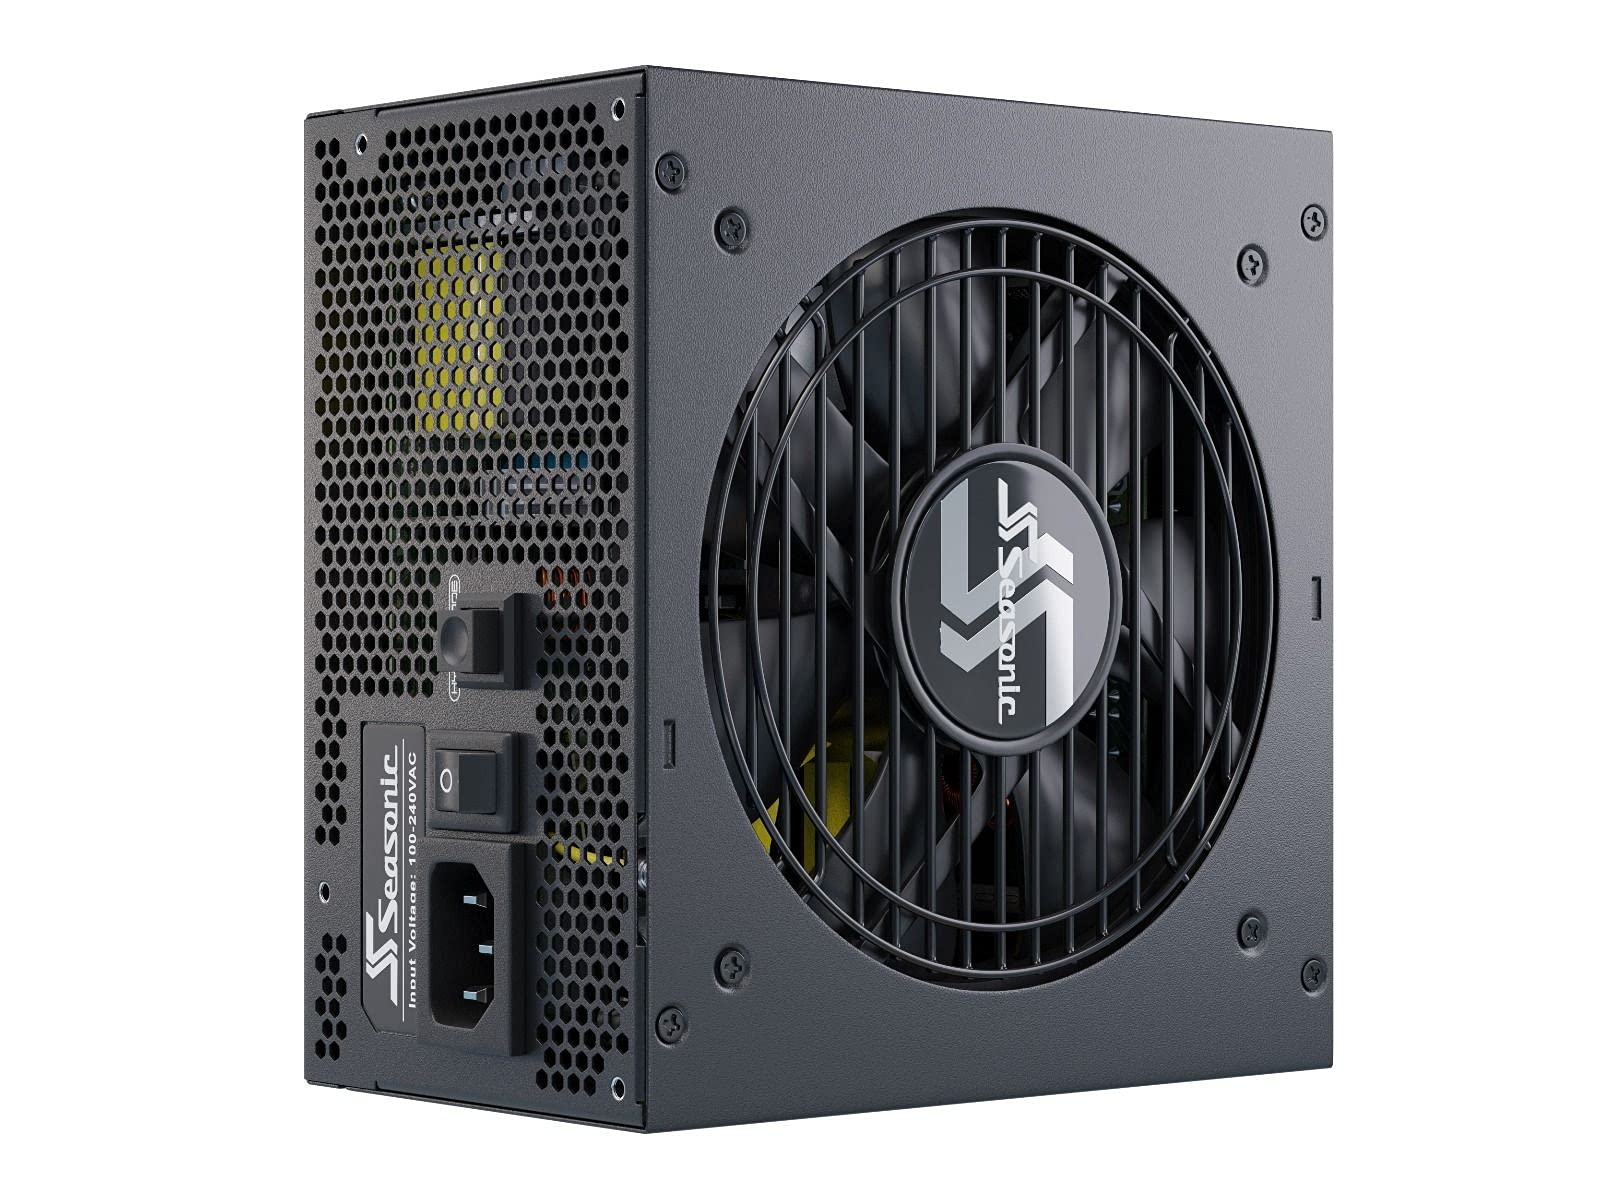 Seasonic FOCUS GX-750, 750W 80+ Gold, Full-Modular, Fan Control in Fanless, Silent, and Cooling Mode, Perfect Power Supply for Gaming and Various Application, SSR-750FX.